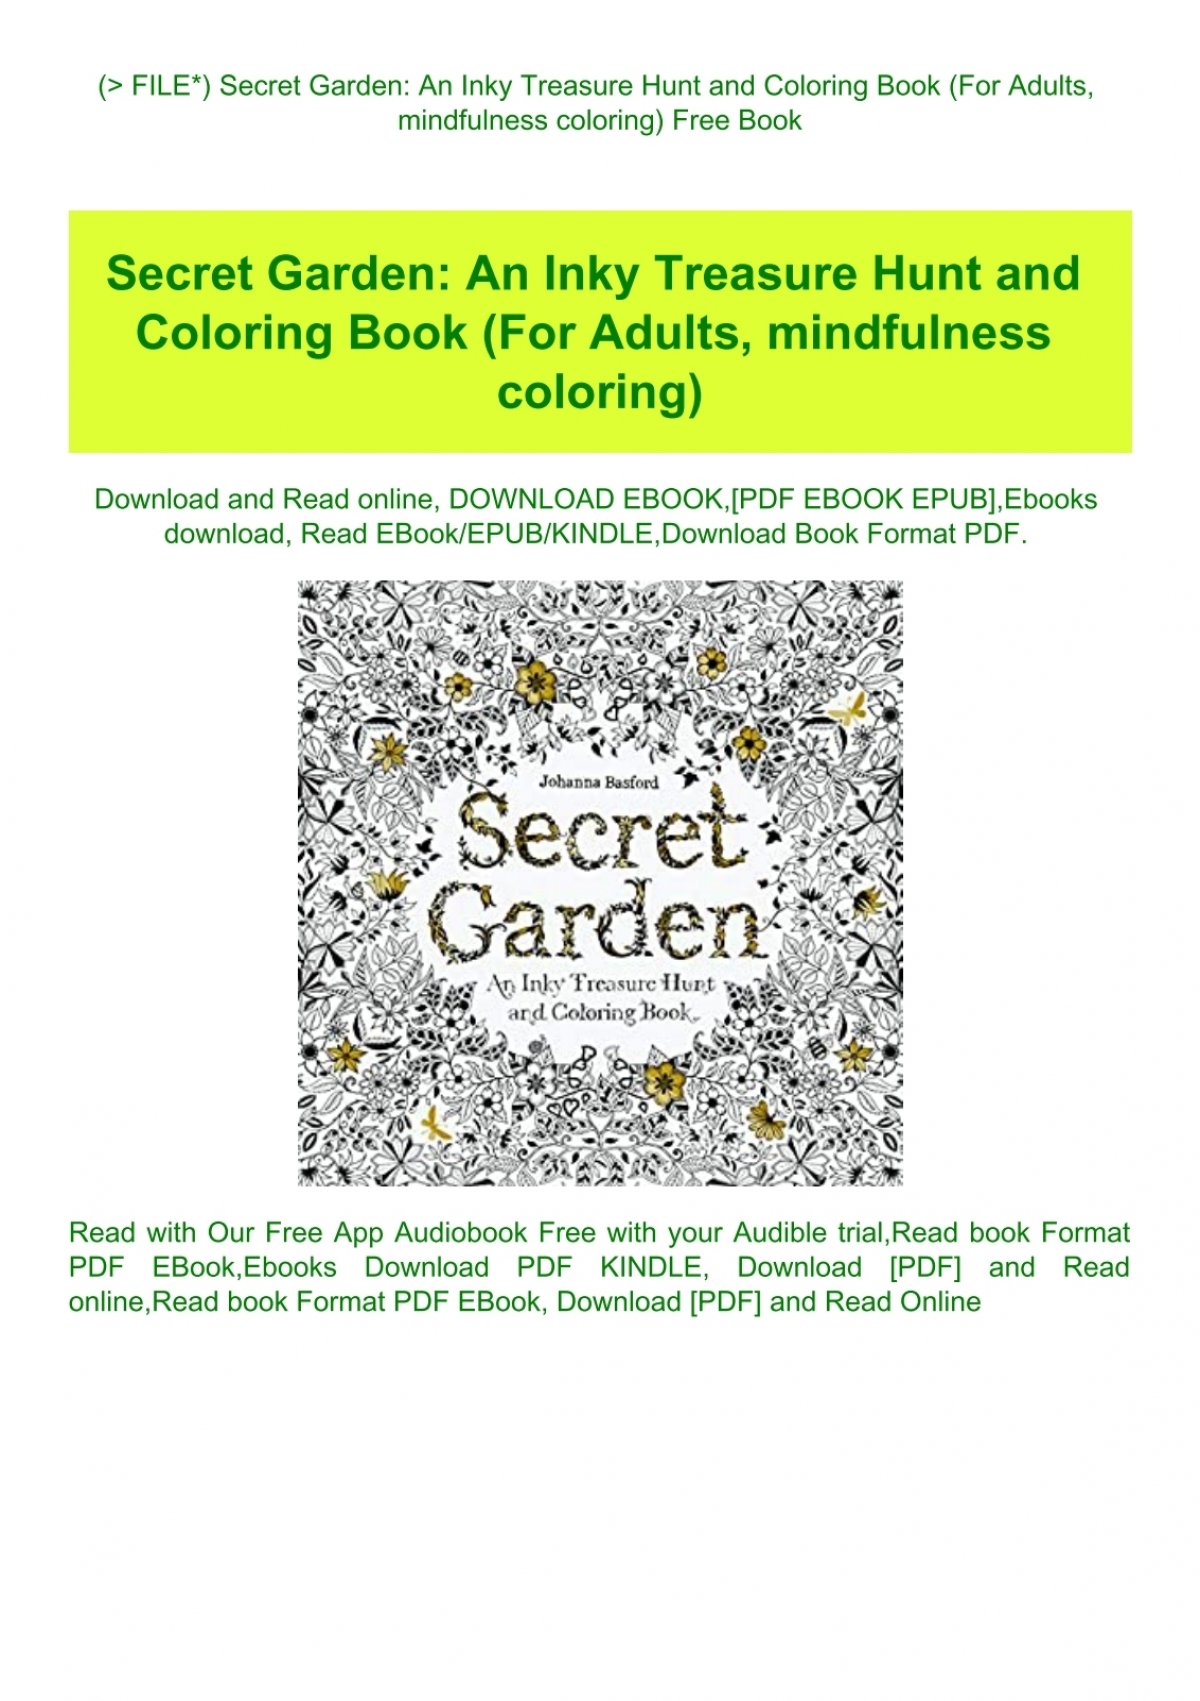 Download P D F File Secret Garden An Inky Treasure Hunt And Coloring Book For Adults Mindfulness Coloring Free Book